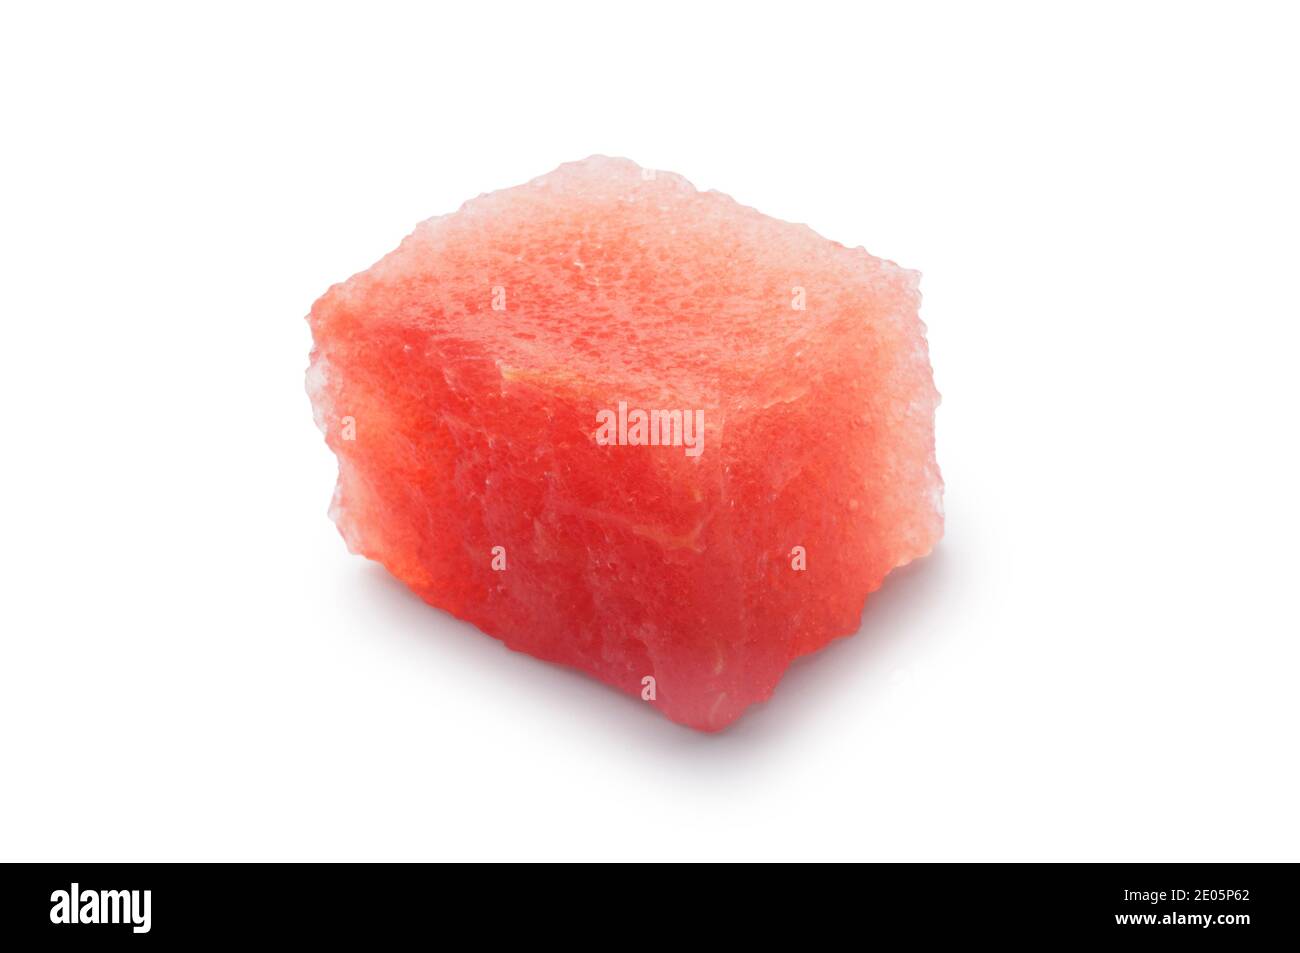 Studio shot of a small piece of water melon cut out against a white background - John Gollop Stock Photo